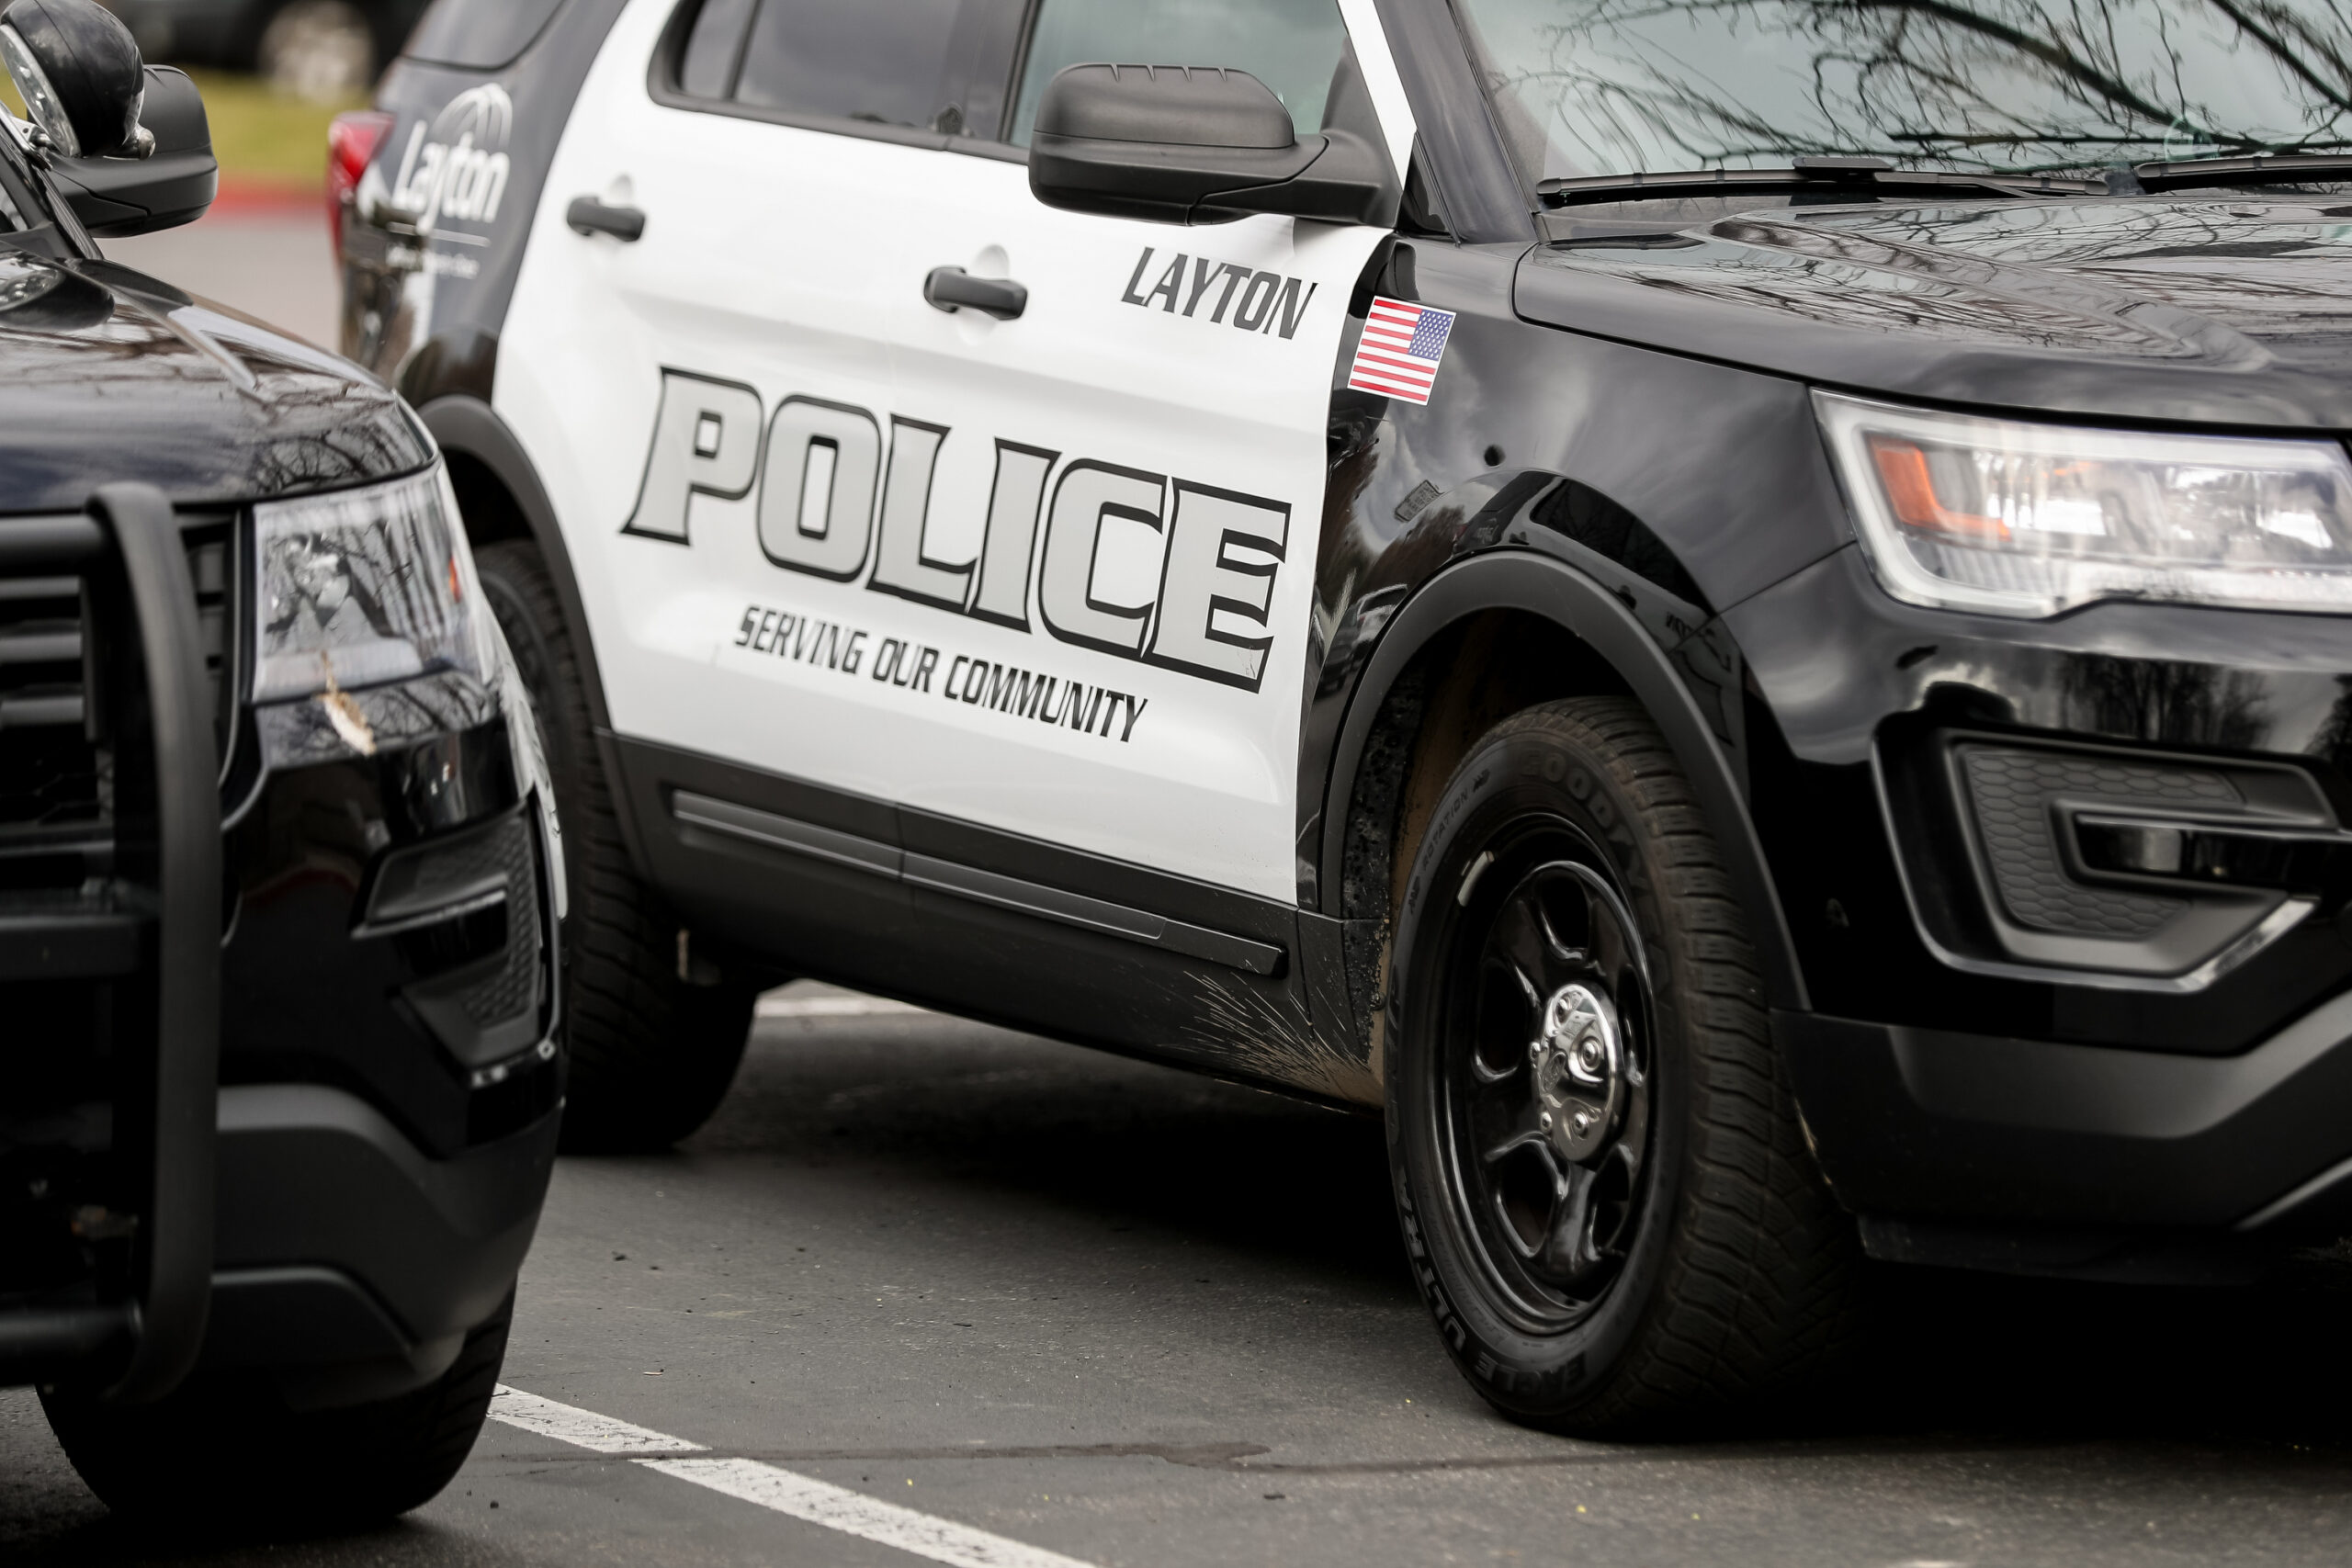 LAYTON, Utah -- A Layton police officer is on administrative leave after being arrested for stalkin...